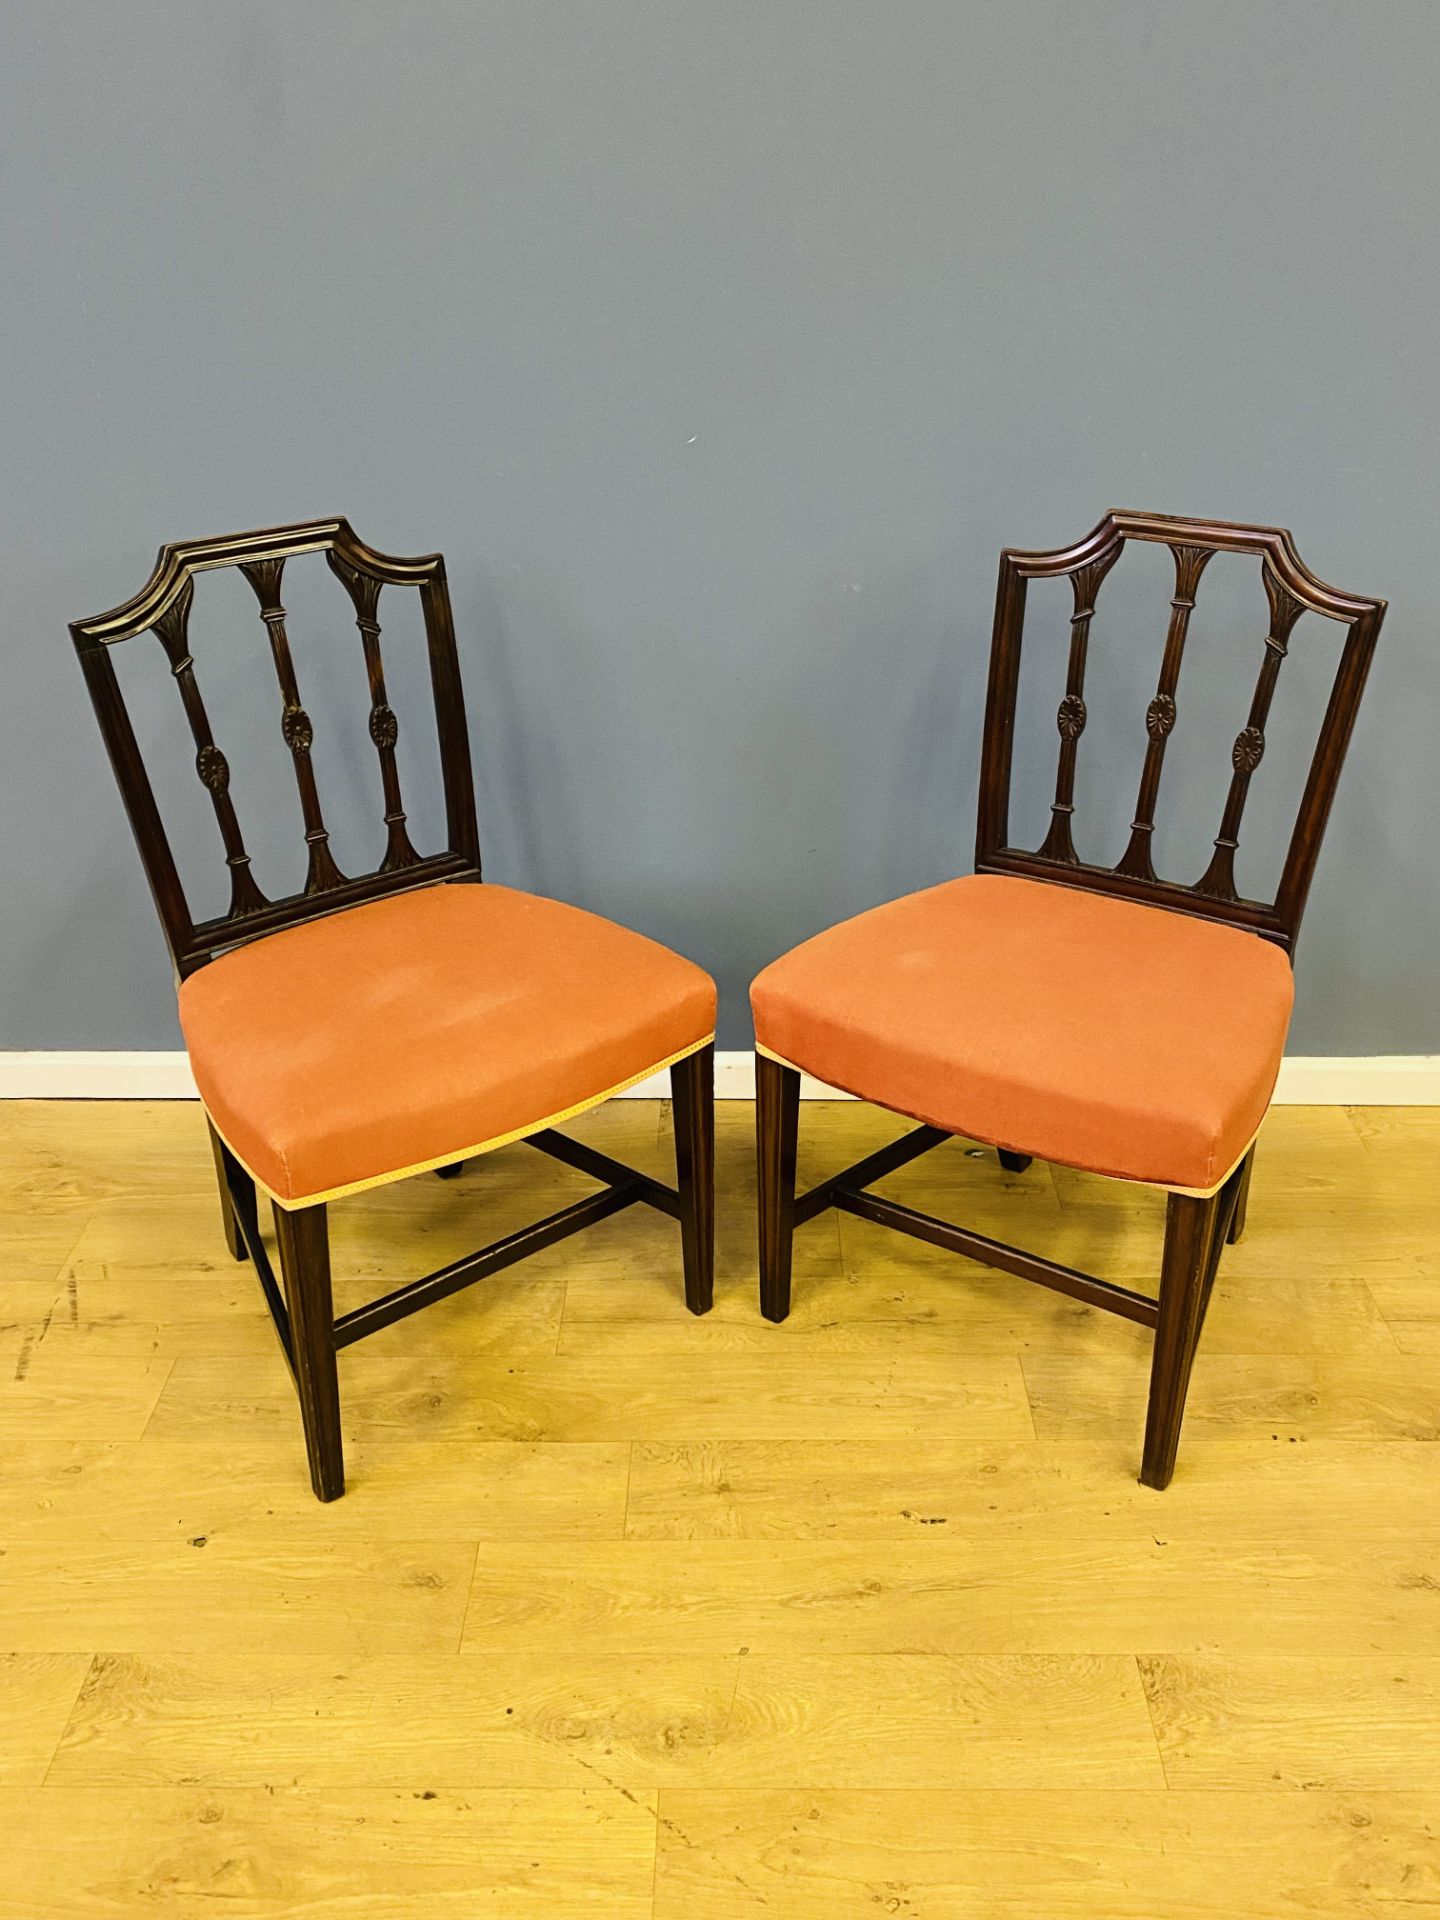 Pair of 19th century mahogany side chairs - Image 4 of 6